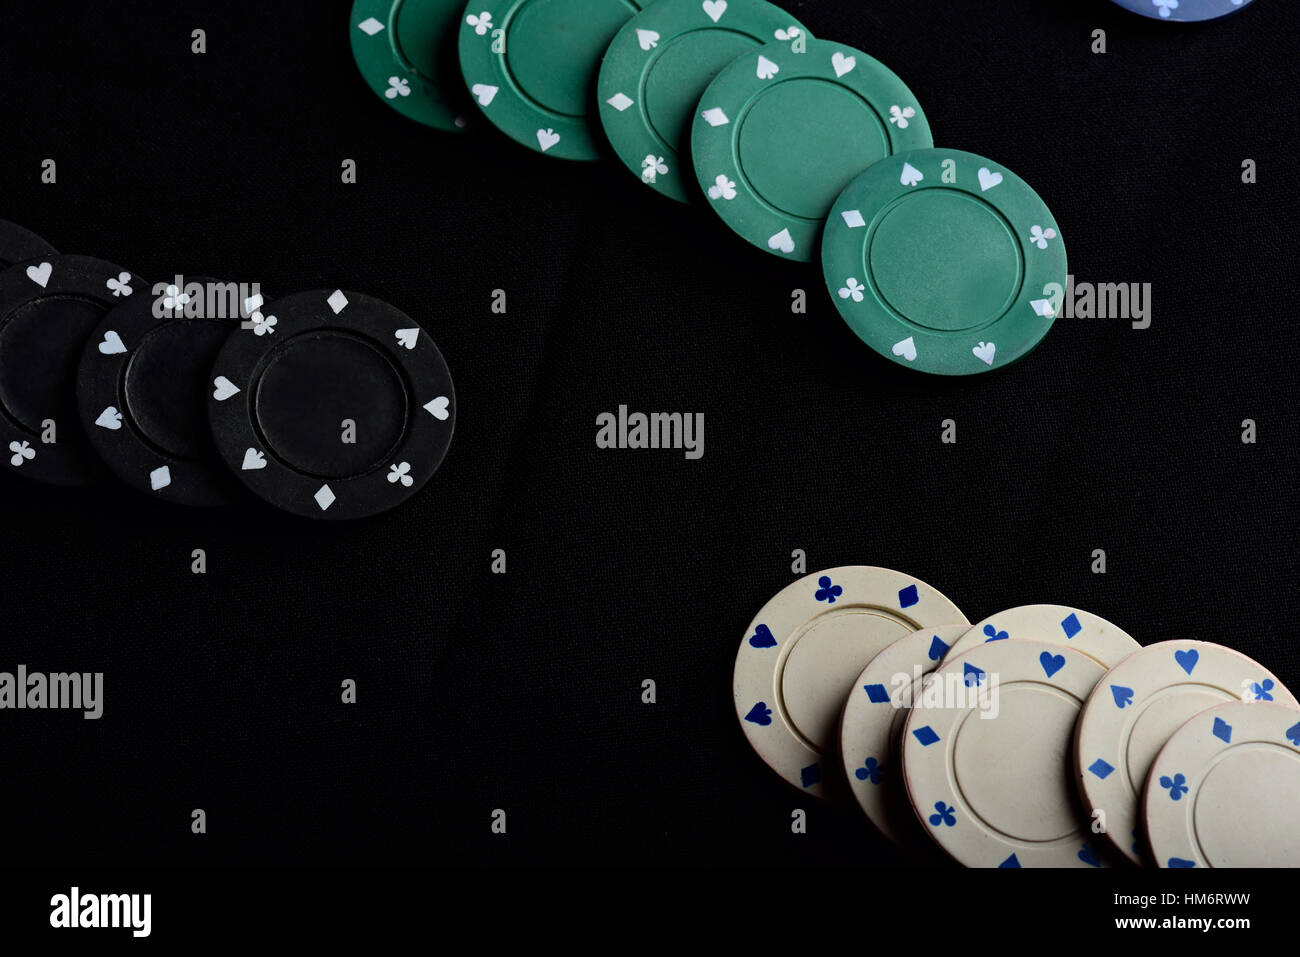 gamble colour chips lay on black table Stock Photo